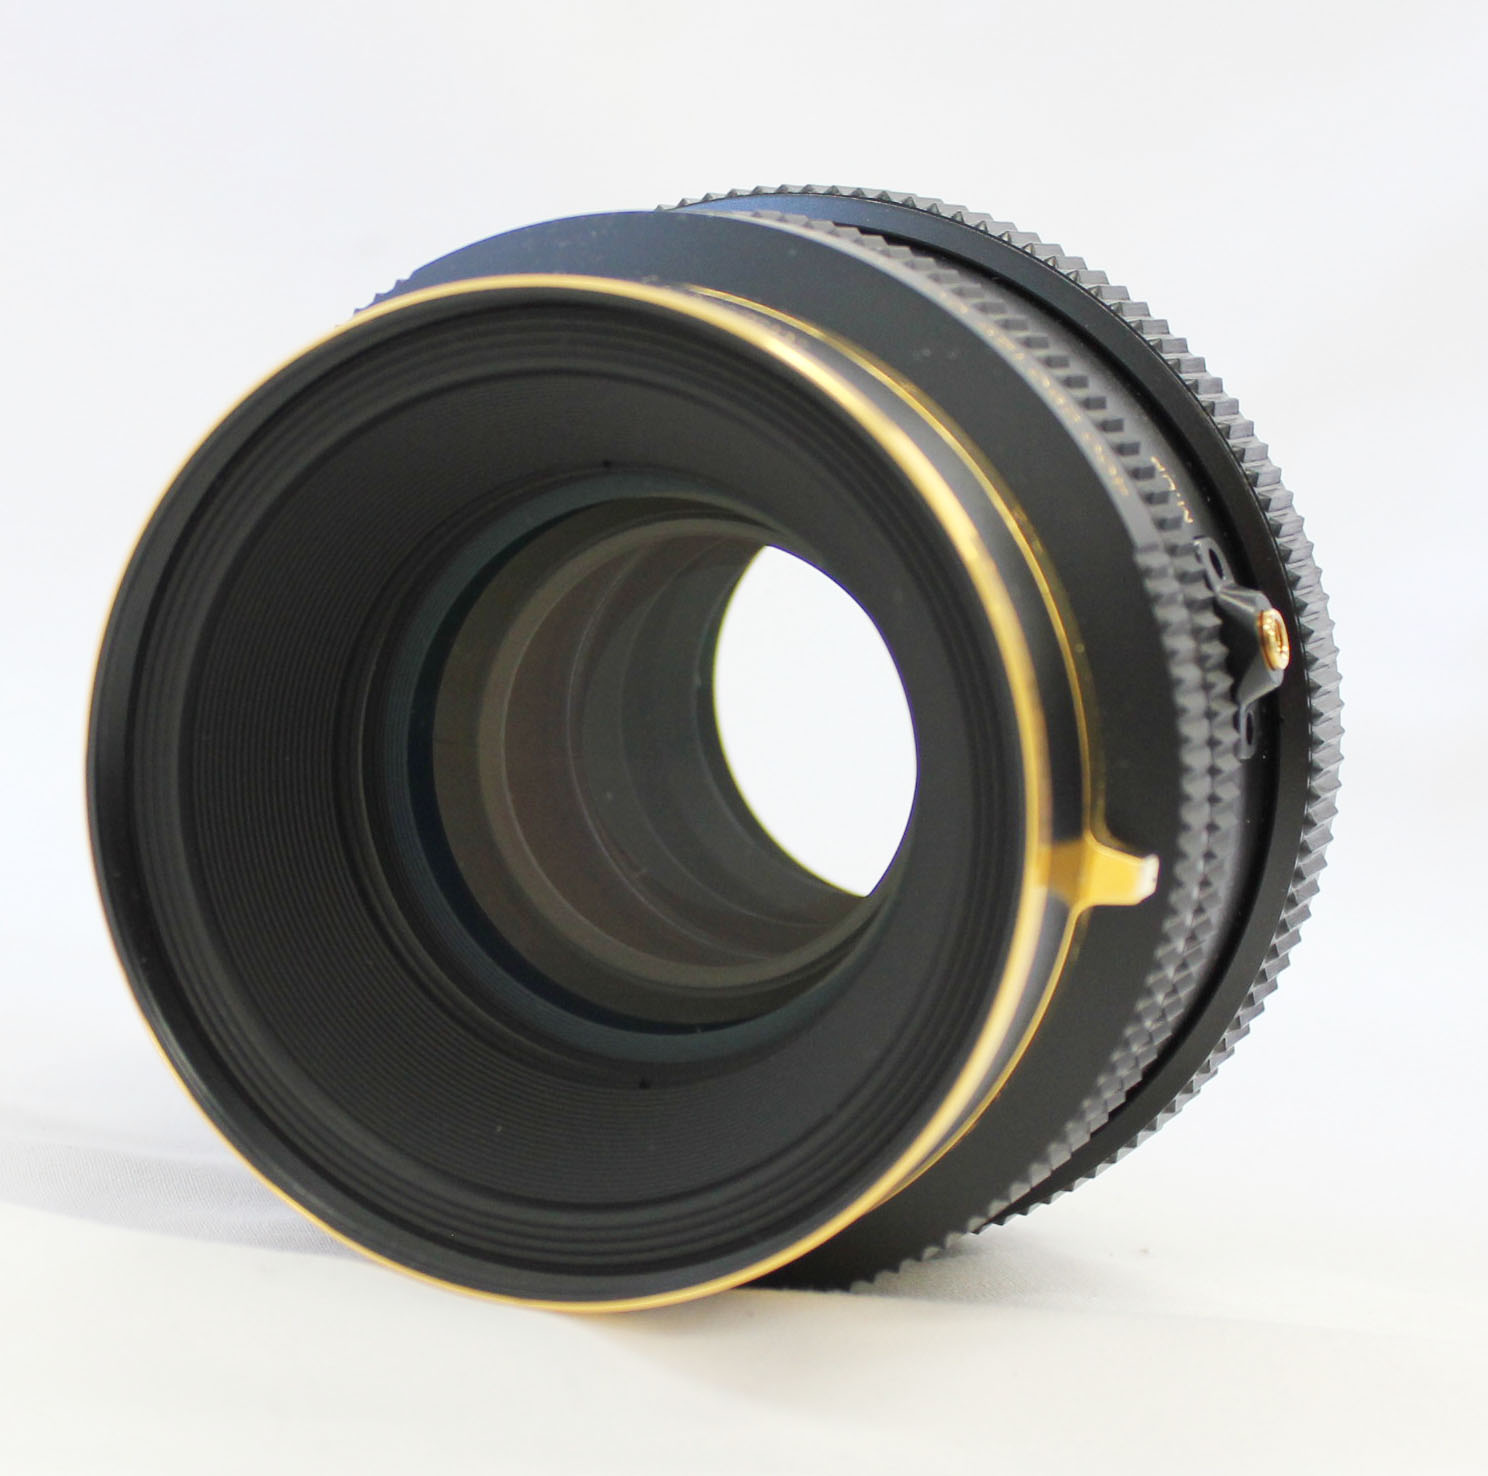 Mamiya RB67 Pro SD Gold K/L 127mm F/3.5 50 Years Limited Edition of 300 from Japan Photo 13